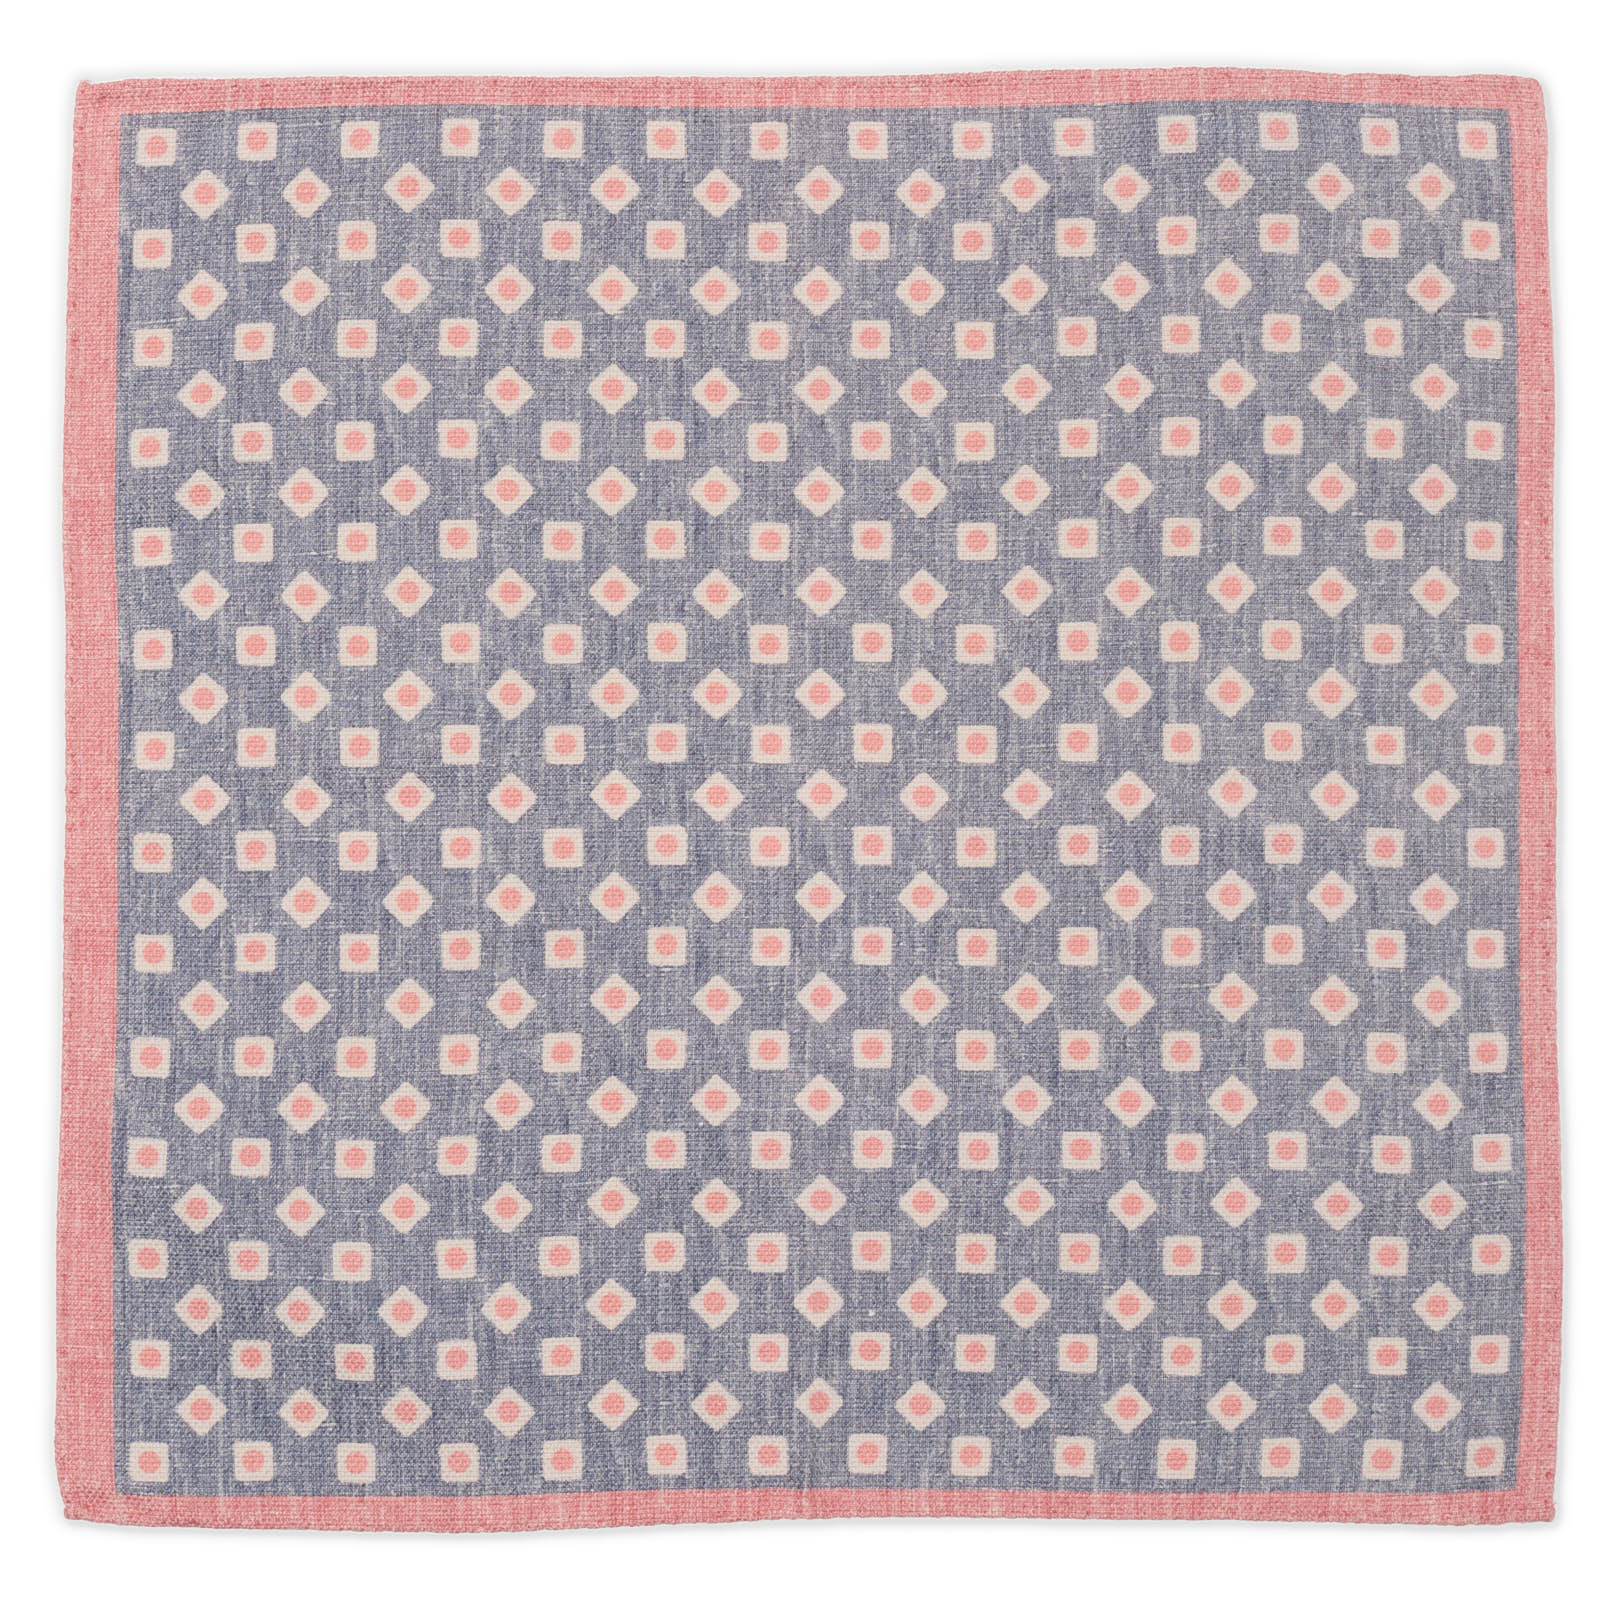 ROSI Handmade Multicolor Solid-Geometric Cotton-Linen Pocket Square Double Sided